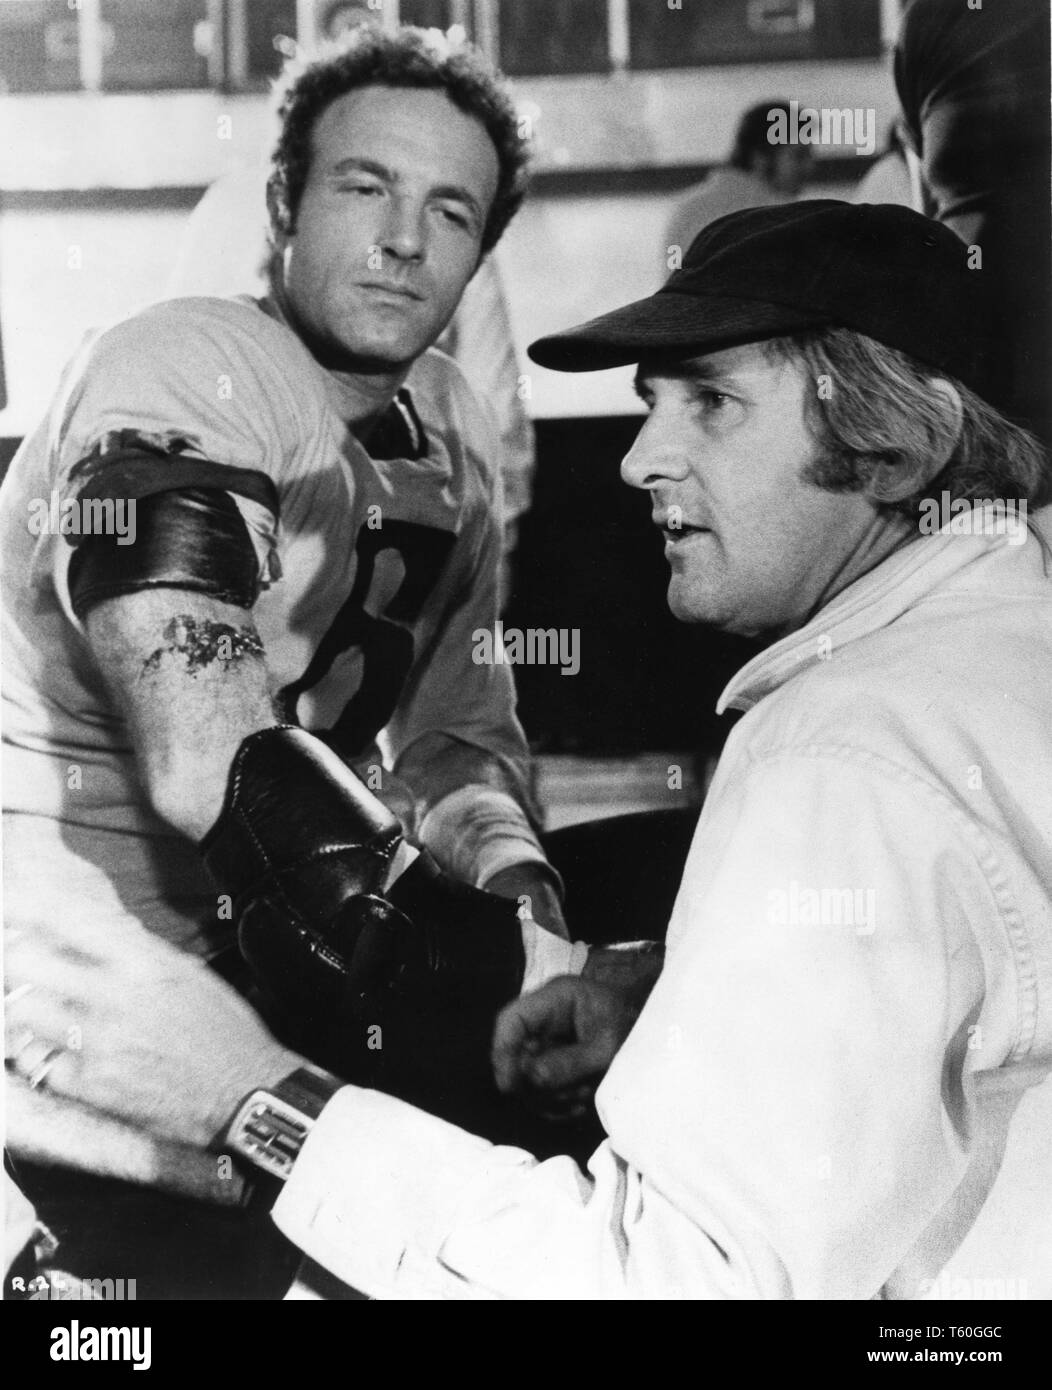 James Caan as Jonathan E. and director Norman Jewison ROLLERBALL 1975 on set candid filming on location Munich Germany  Algonquin / United Artists Stock Photo